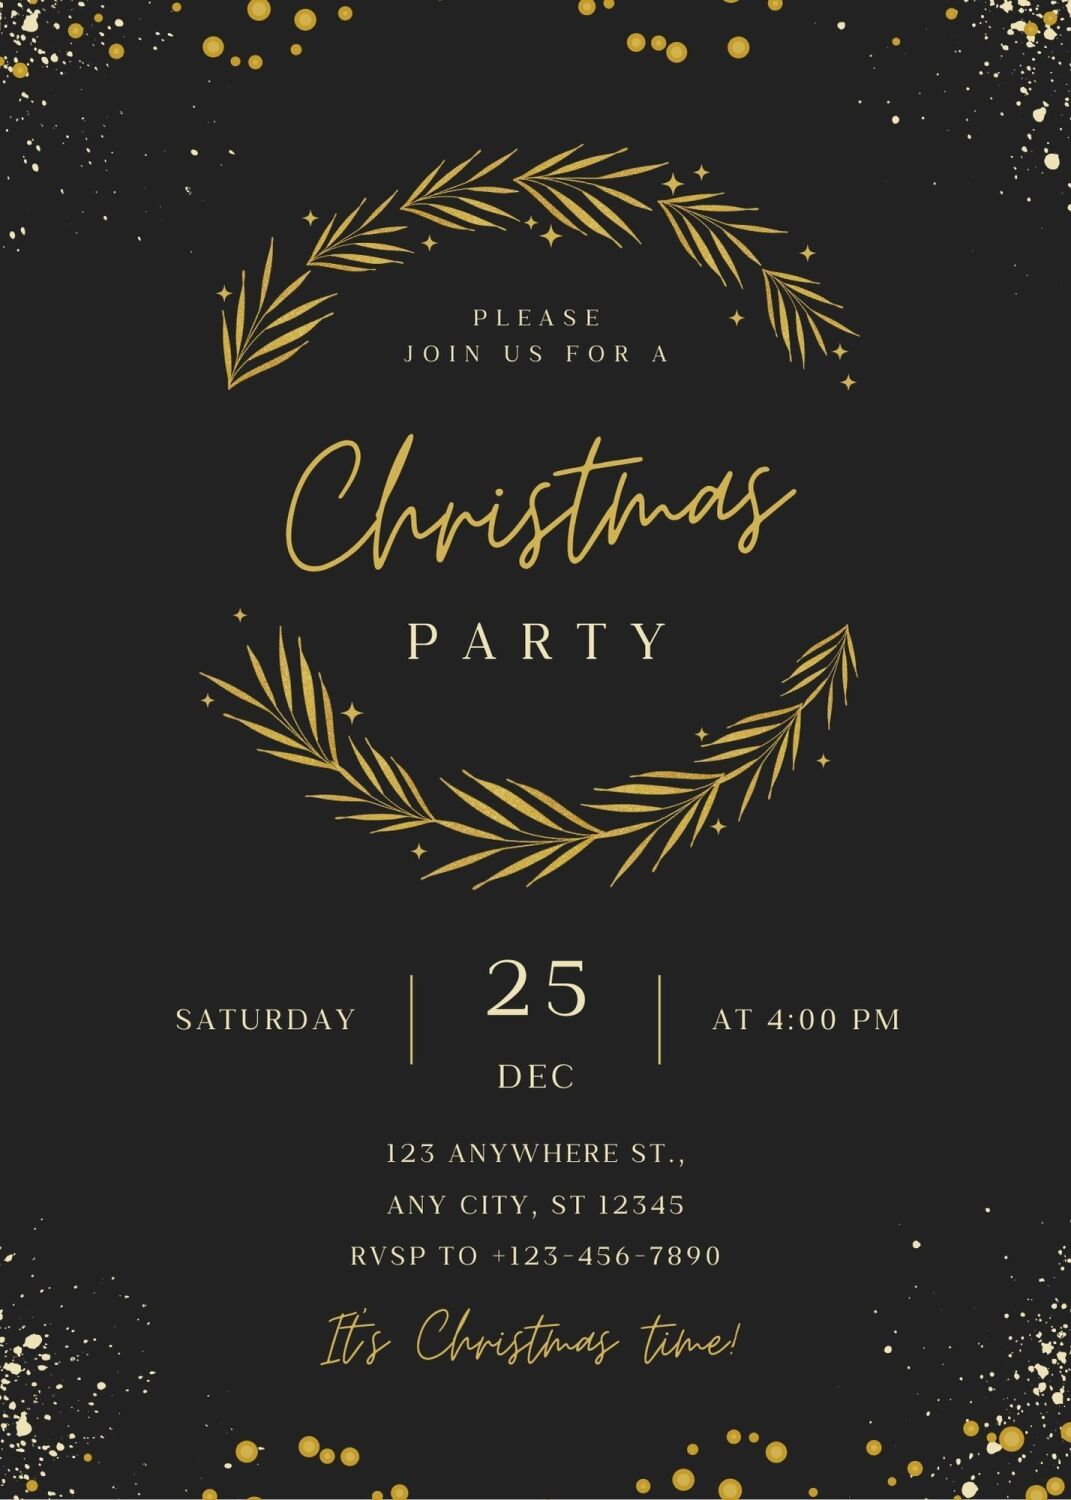 Personalised With Your Details - Customised Christmas Party Invitation PDF 